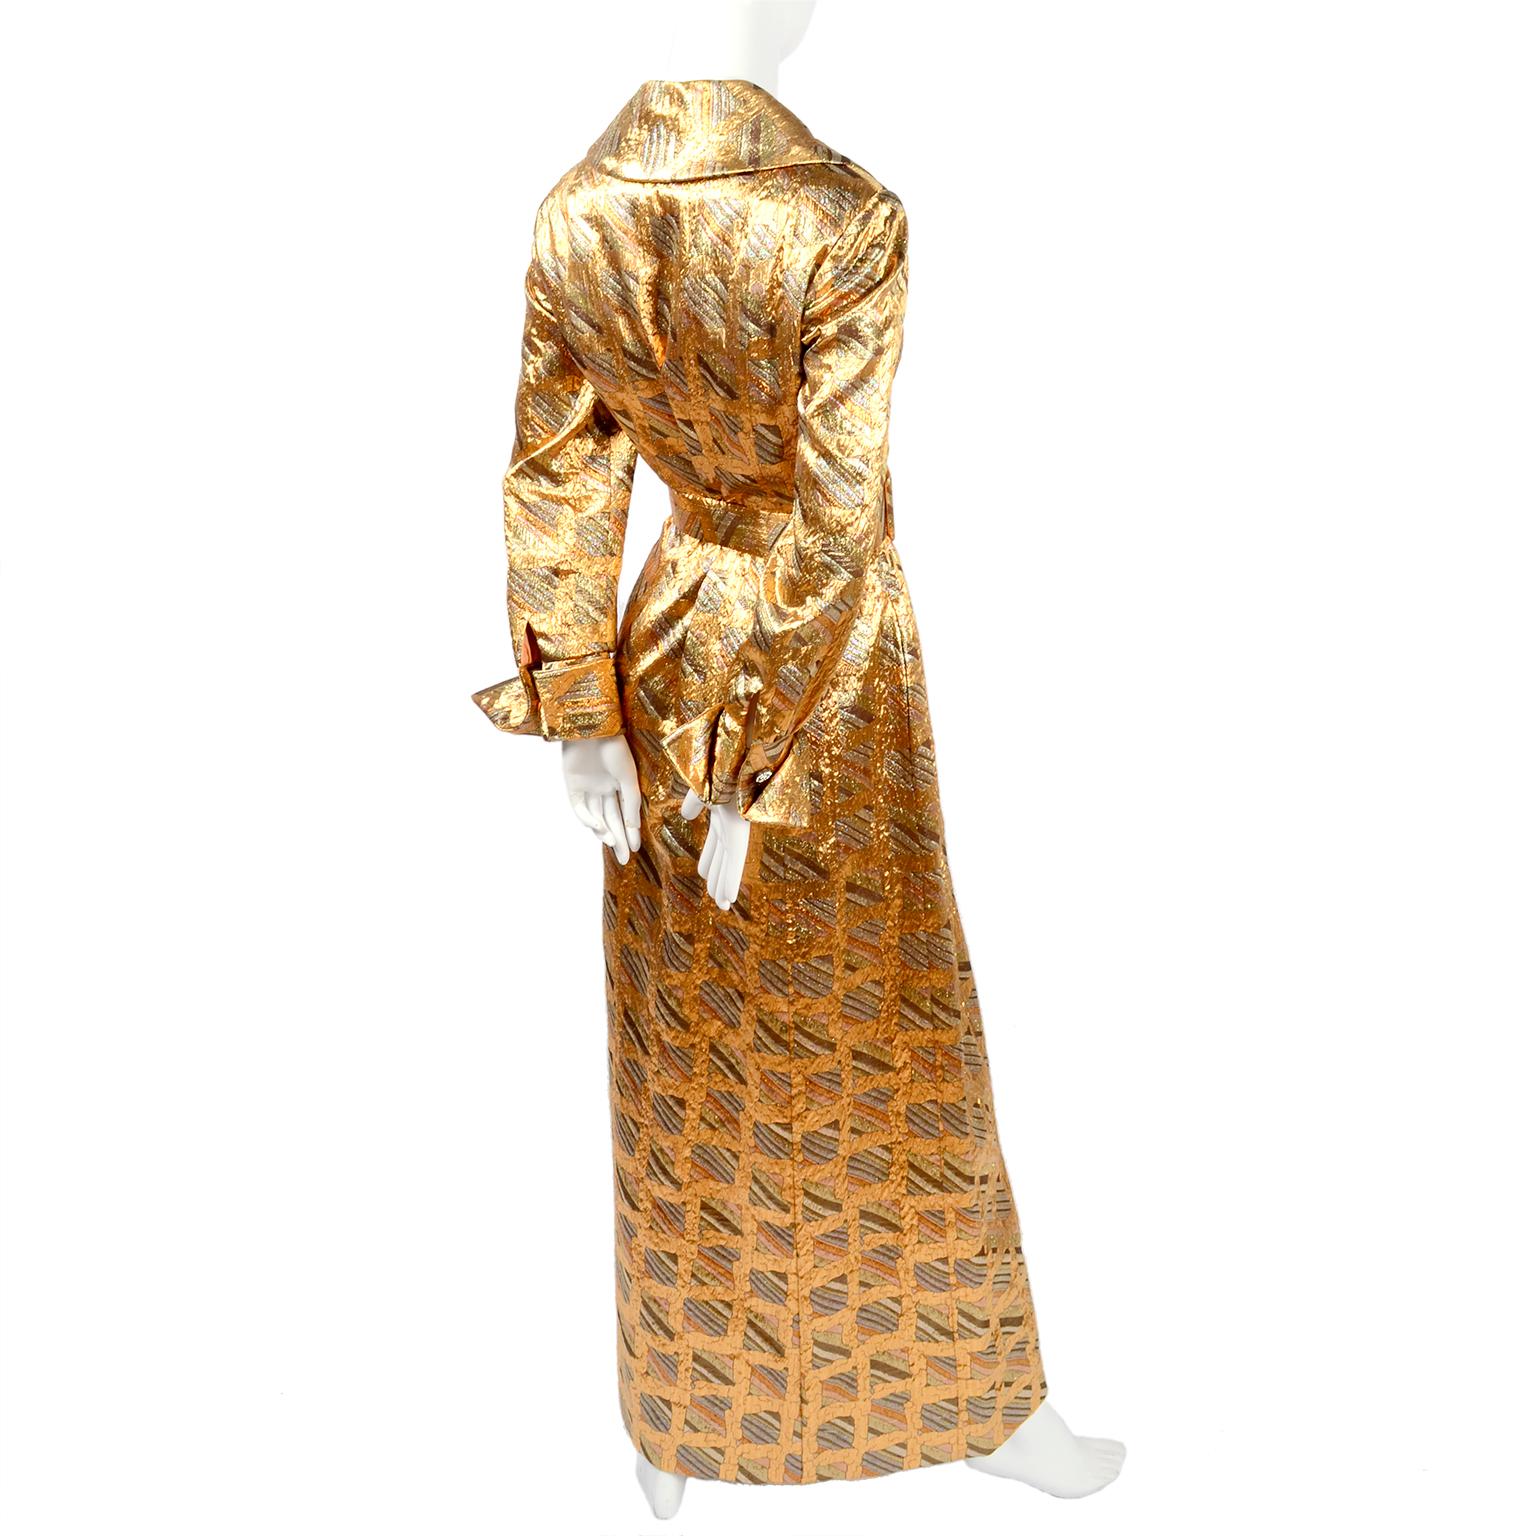 This show stopping metallic dress was made in Hong Kong by Dynasty in the late 1960's or very early 1970's.  The dress has its original matching belt and the 